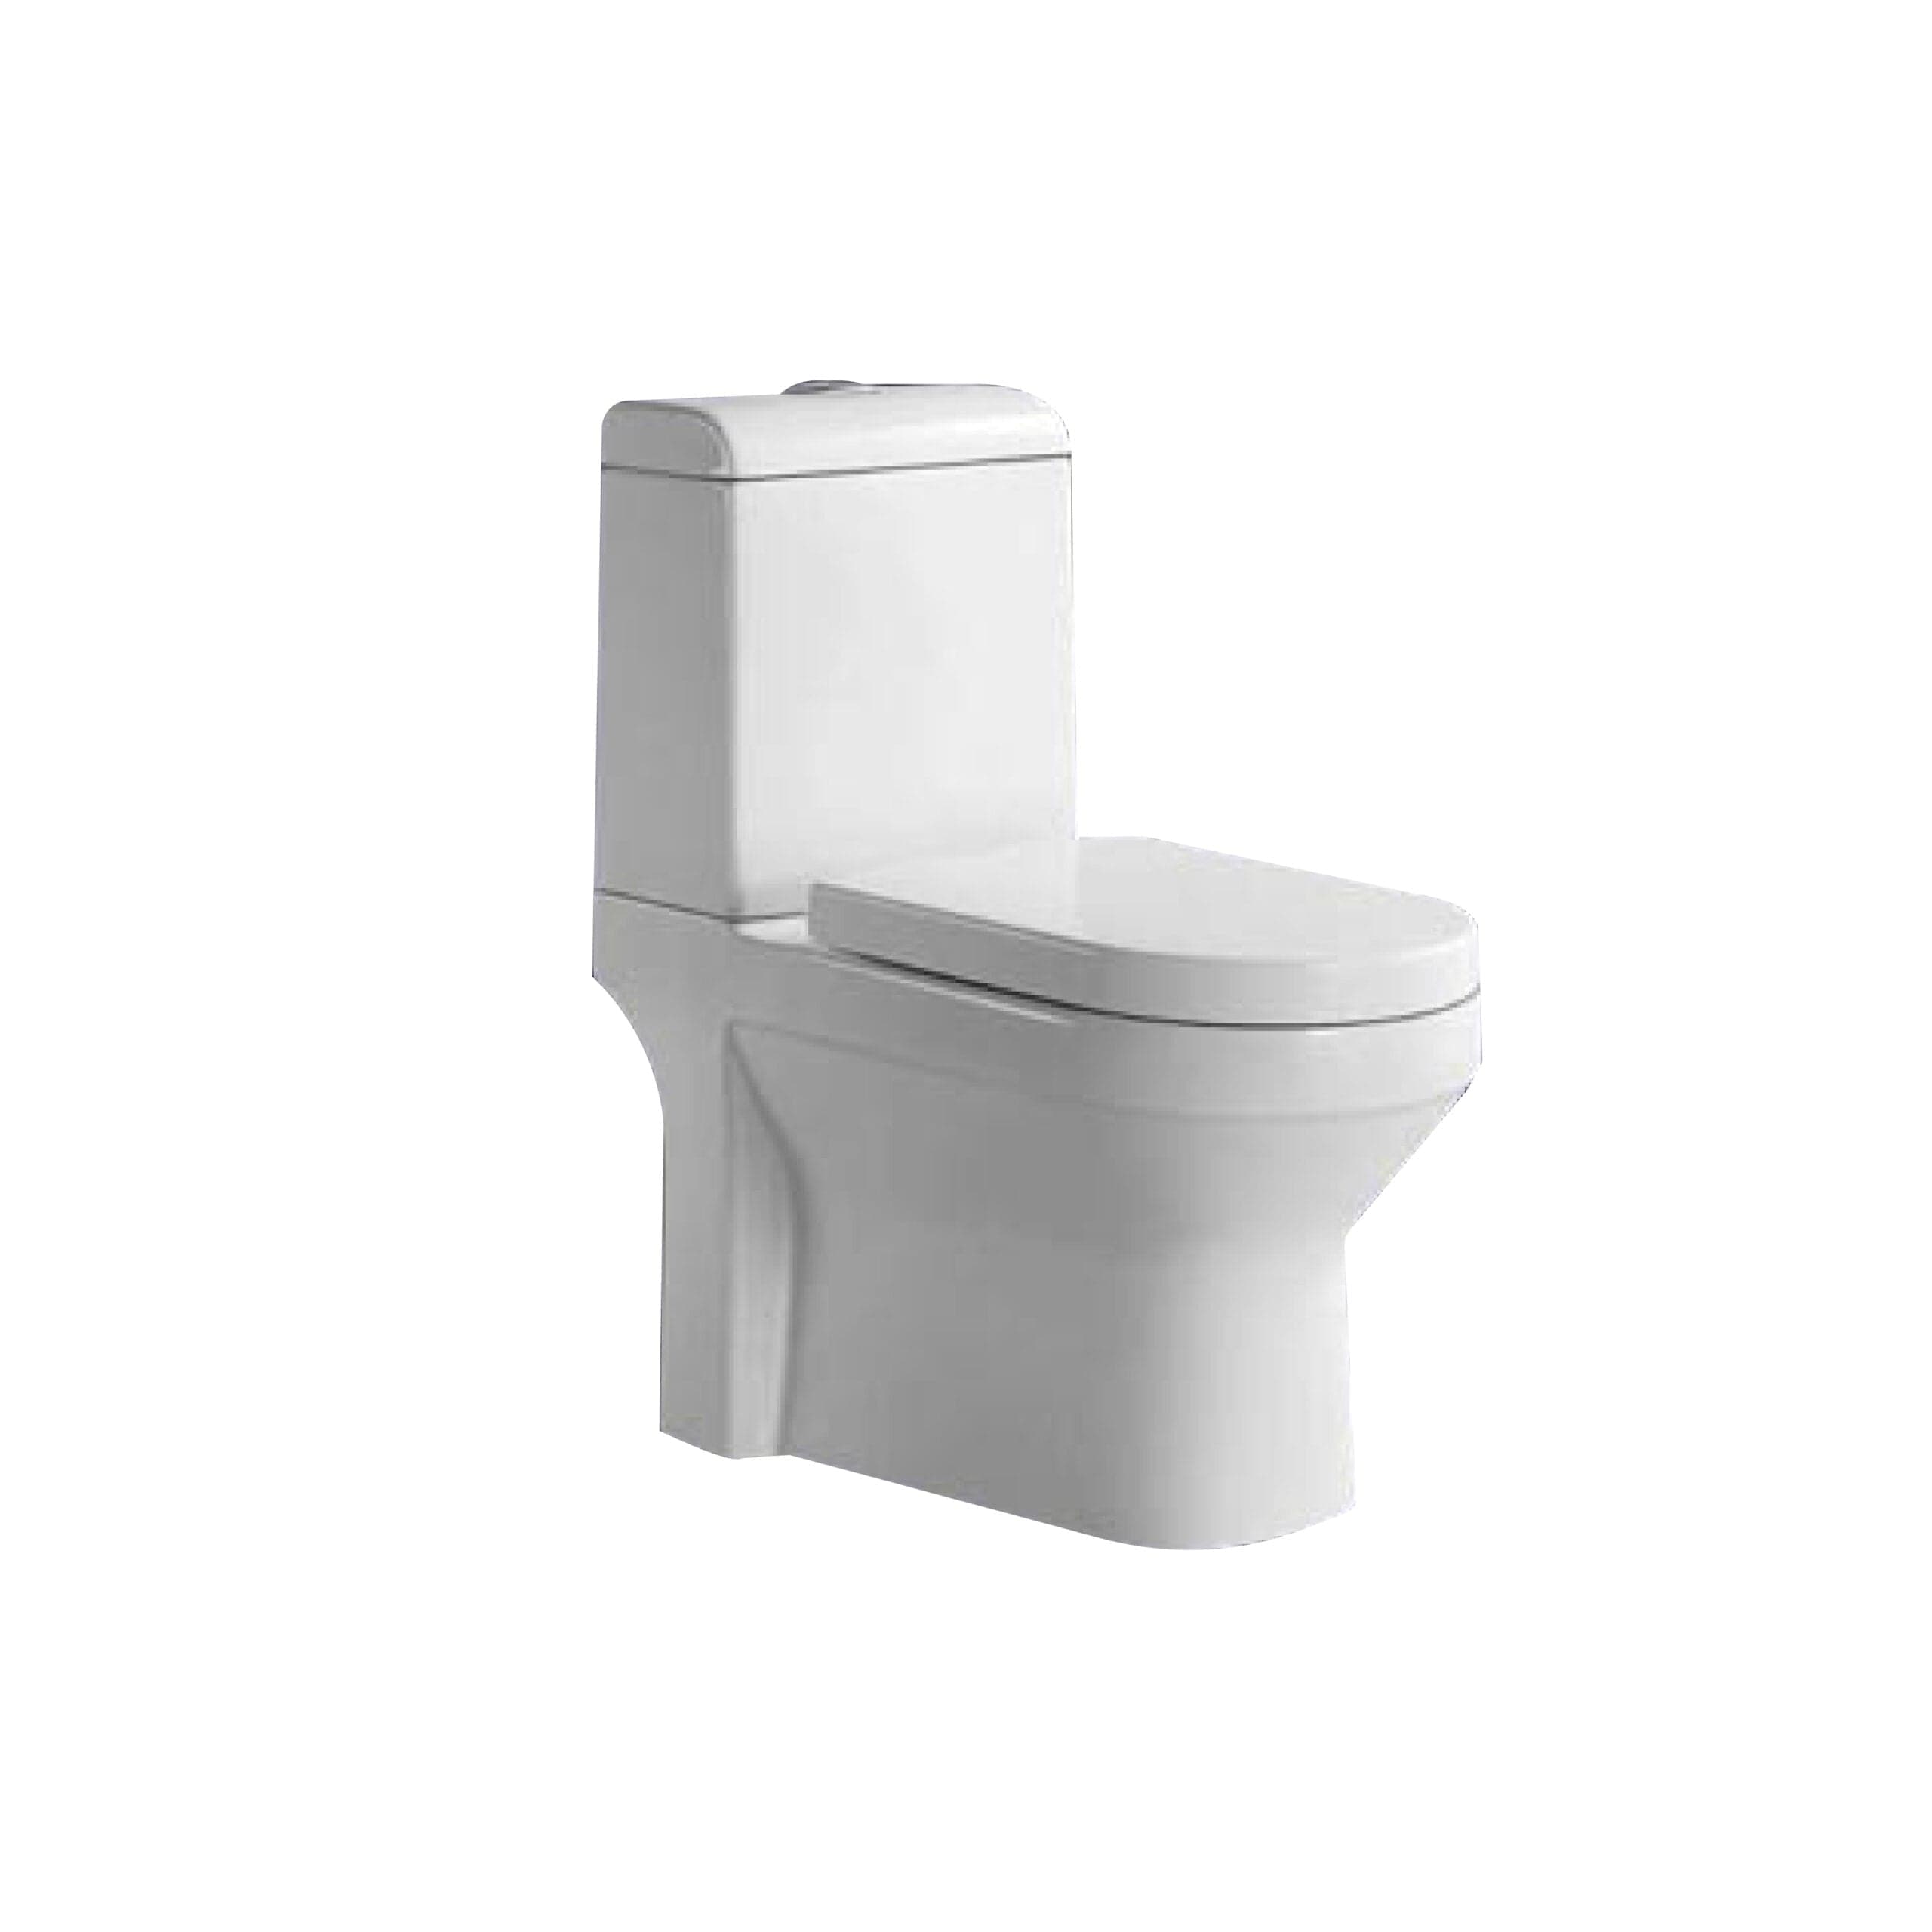 One-piece Washdown Water Closet P-Trap 680 x 385 x 745mm - AP2132  | Supply Master | Accra, Ghana Toilet & Urinal Buy Tools hardware Building materials